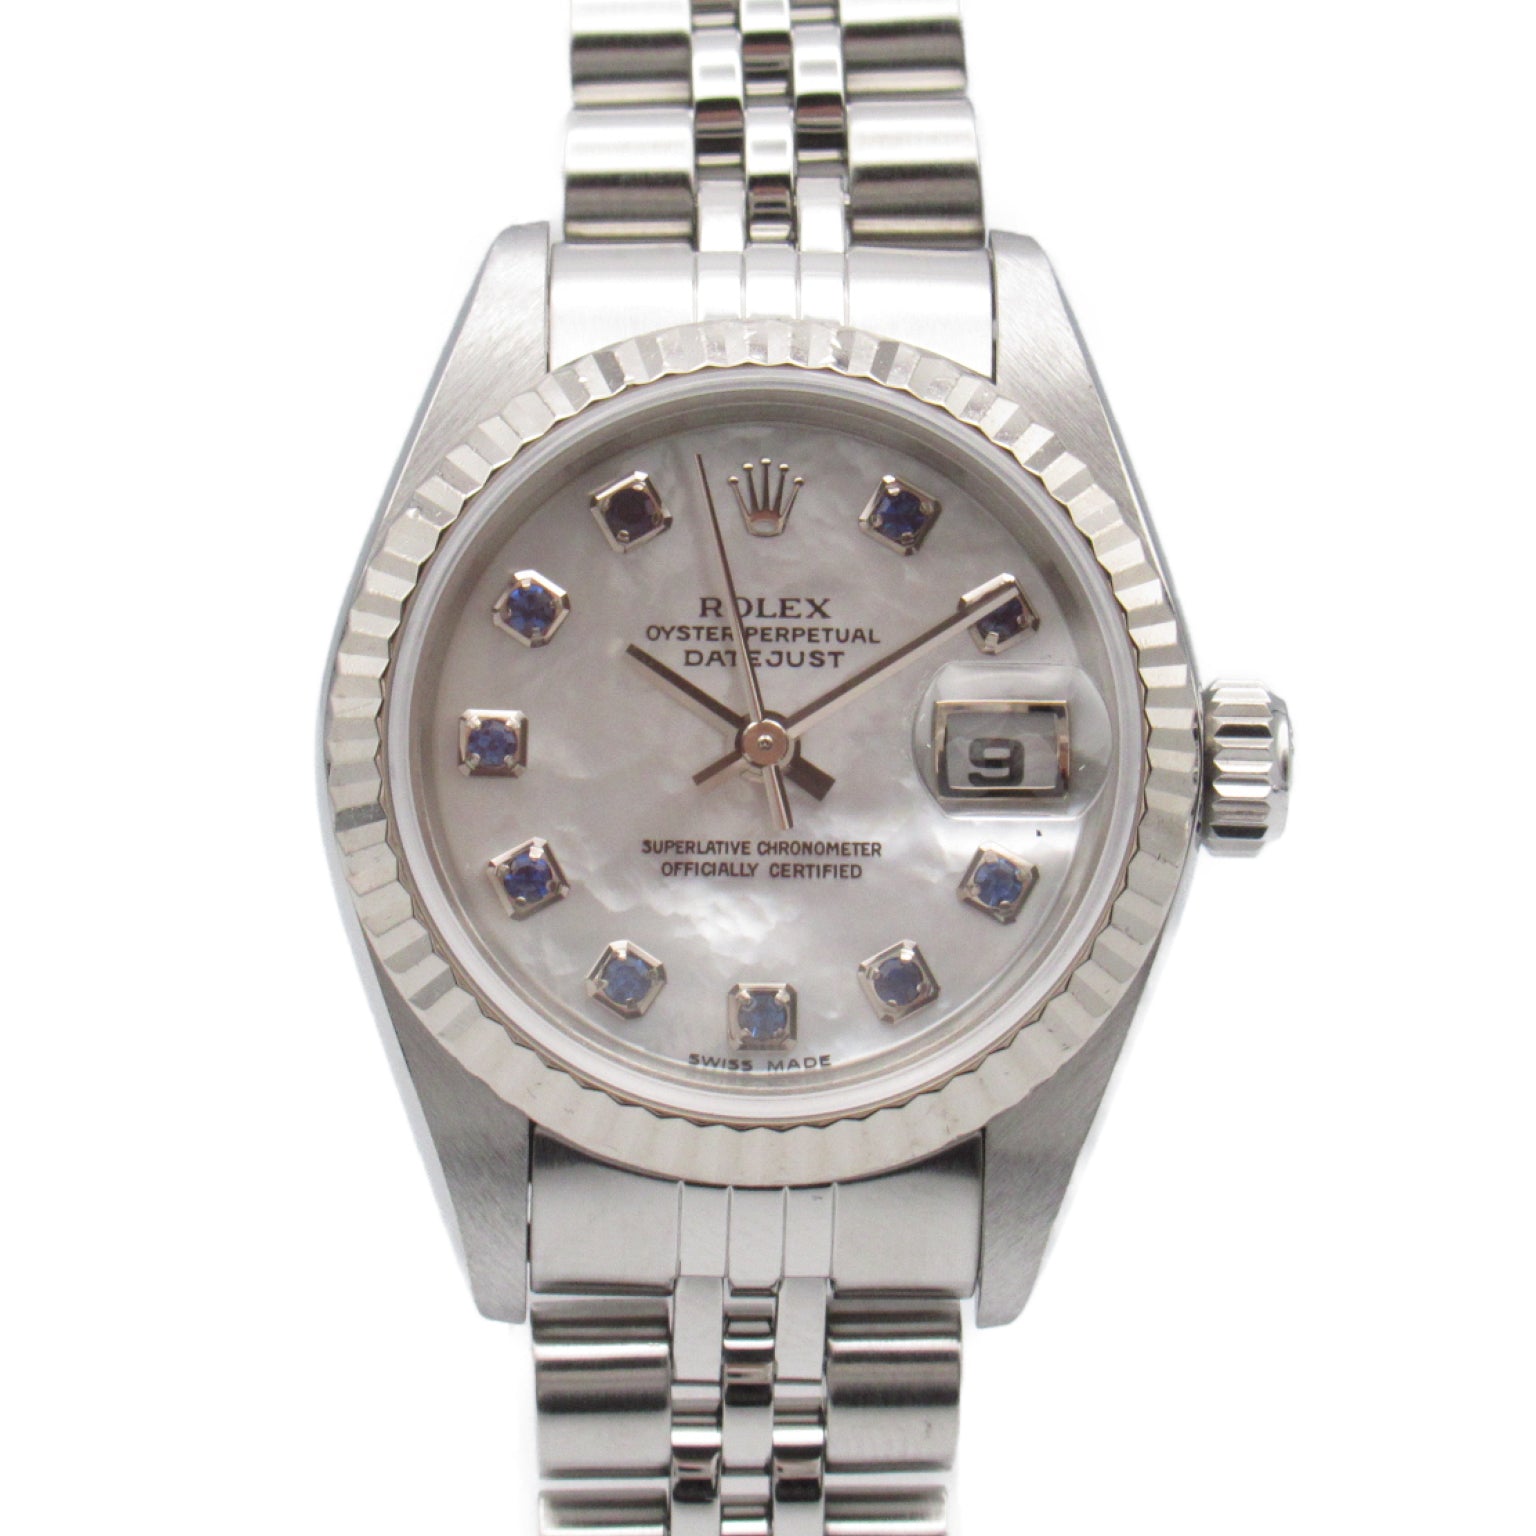 Rolex Rolex Datejust 10P Sapphire F Nonene.  K18WG (White G) Stainless Steel  WH S 79174NGS